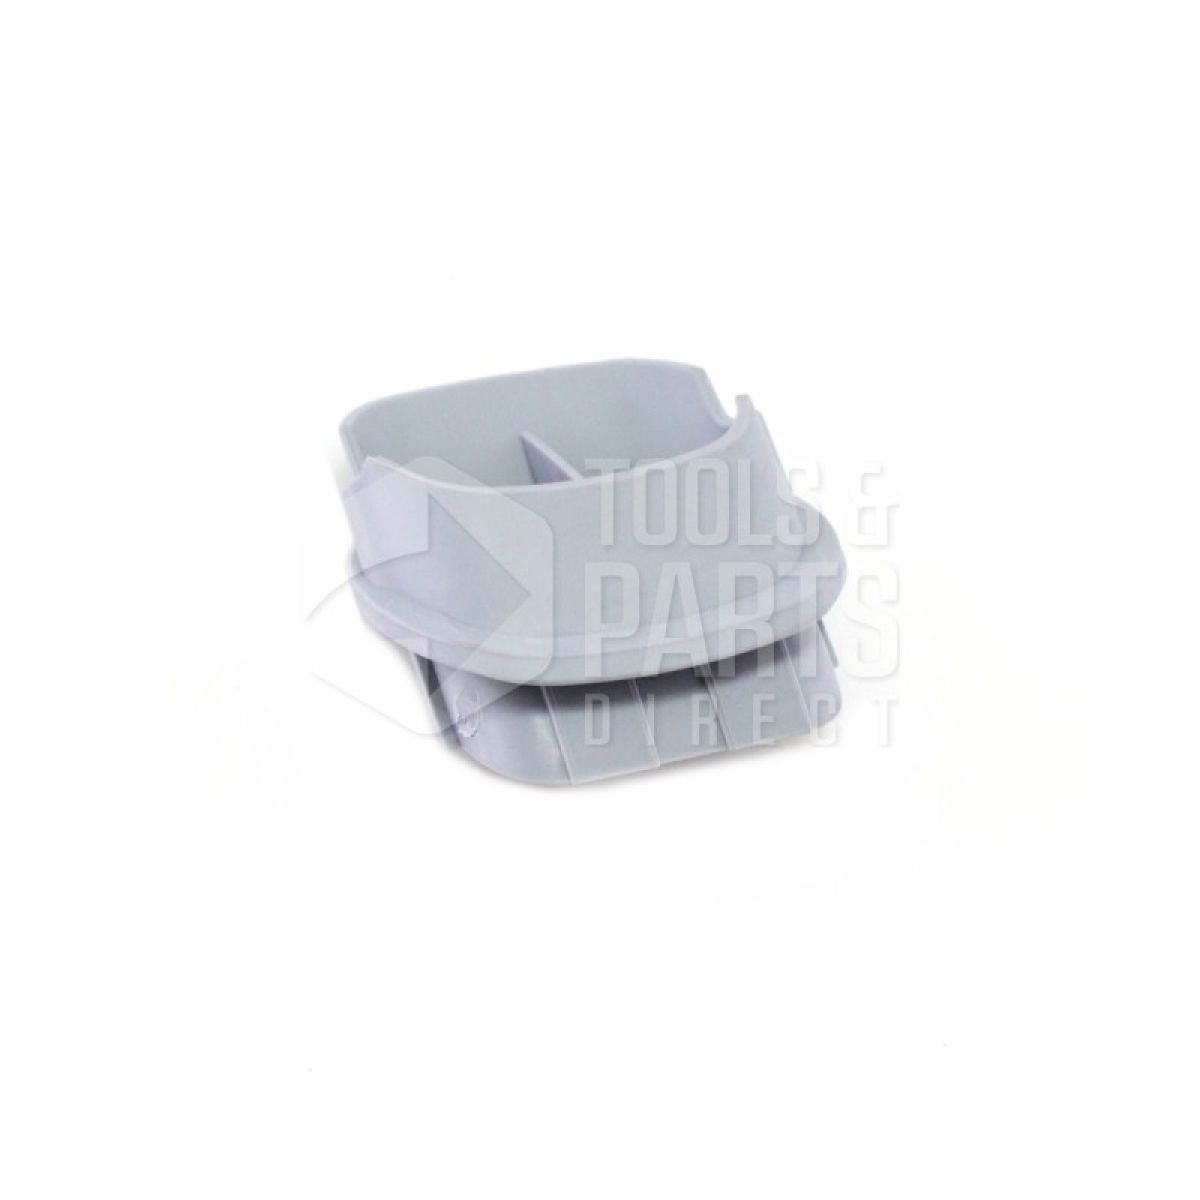 Black & Decker Pv1405 Dustbuster (type H1) Spare Parts SPARE_PV1405/TYPE_H1  from Spare Parts World